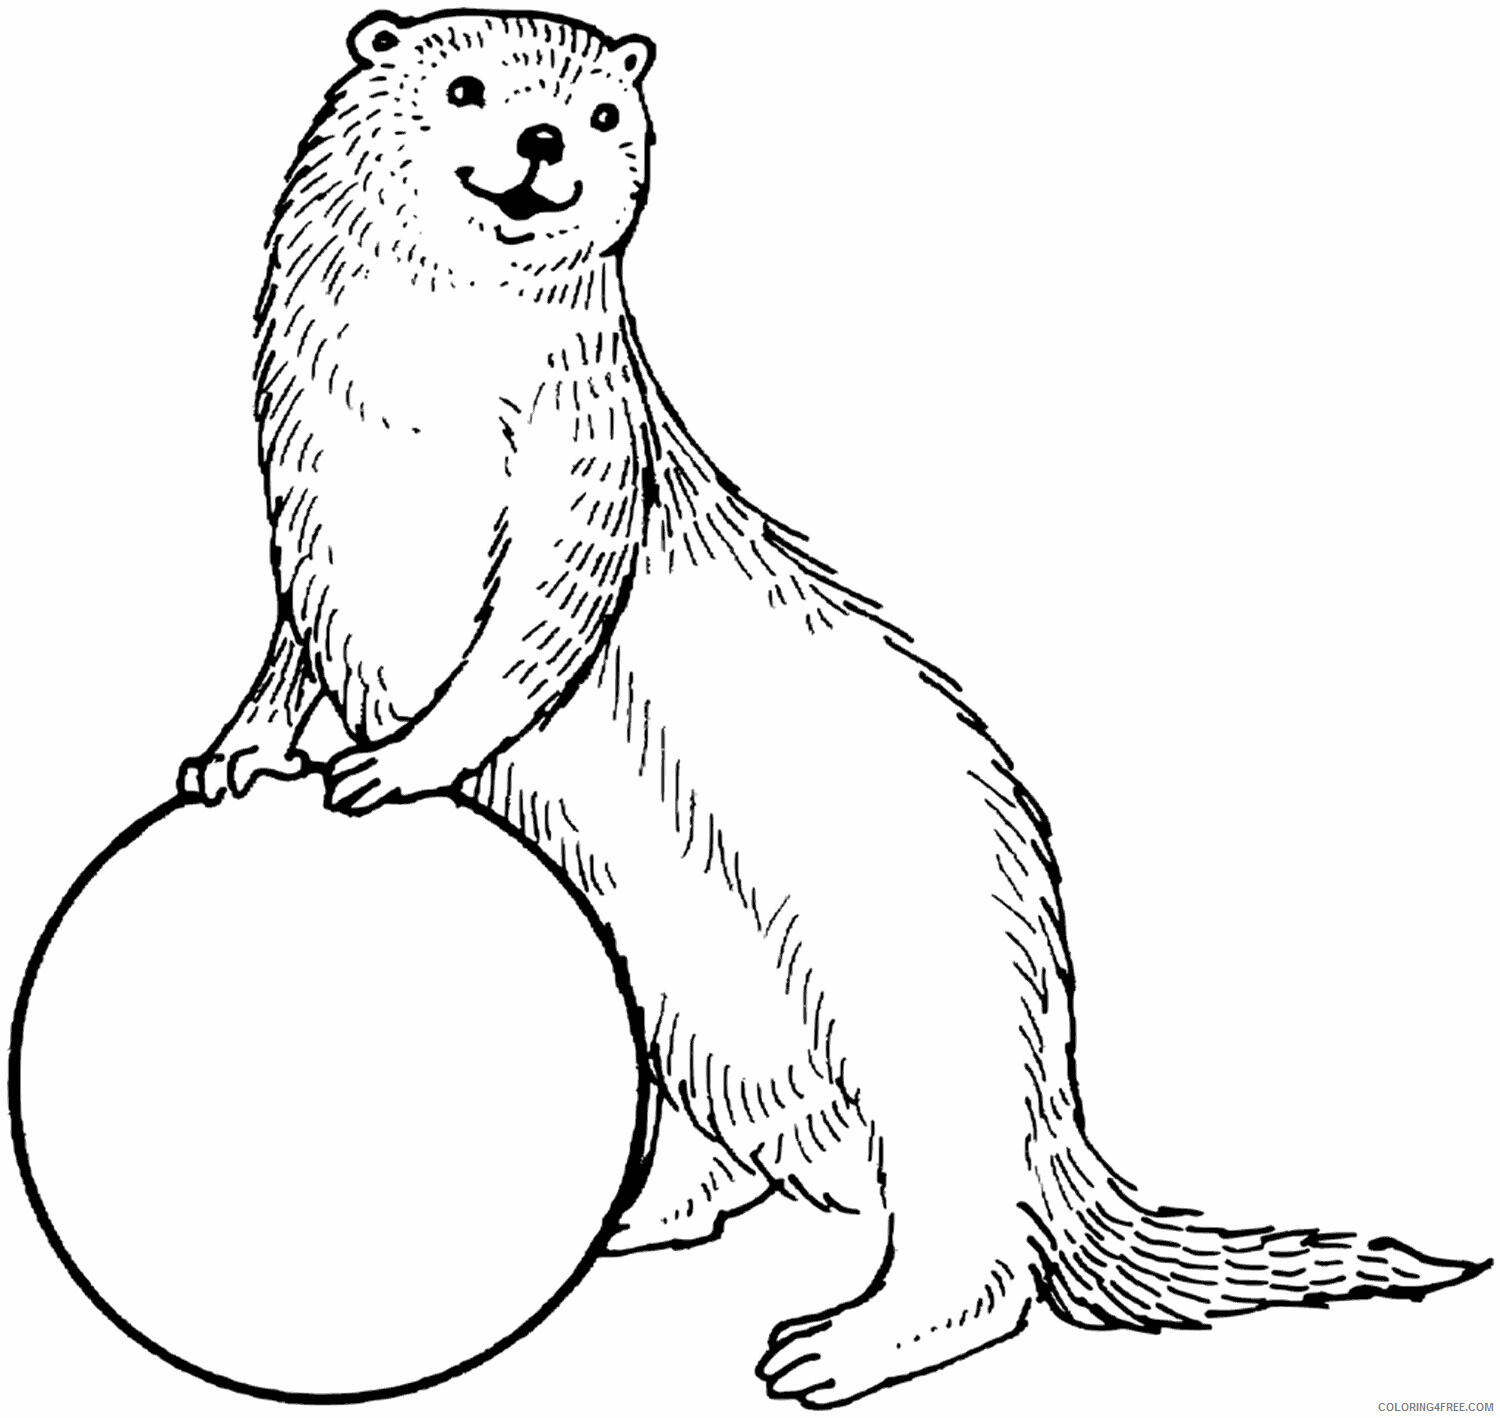 Otter Coloring Pages Animal Printable Sheets Otter with a Ball 2021 3594 Coloring4free